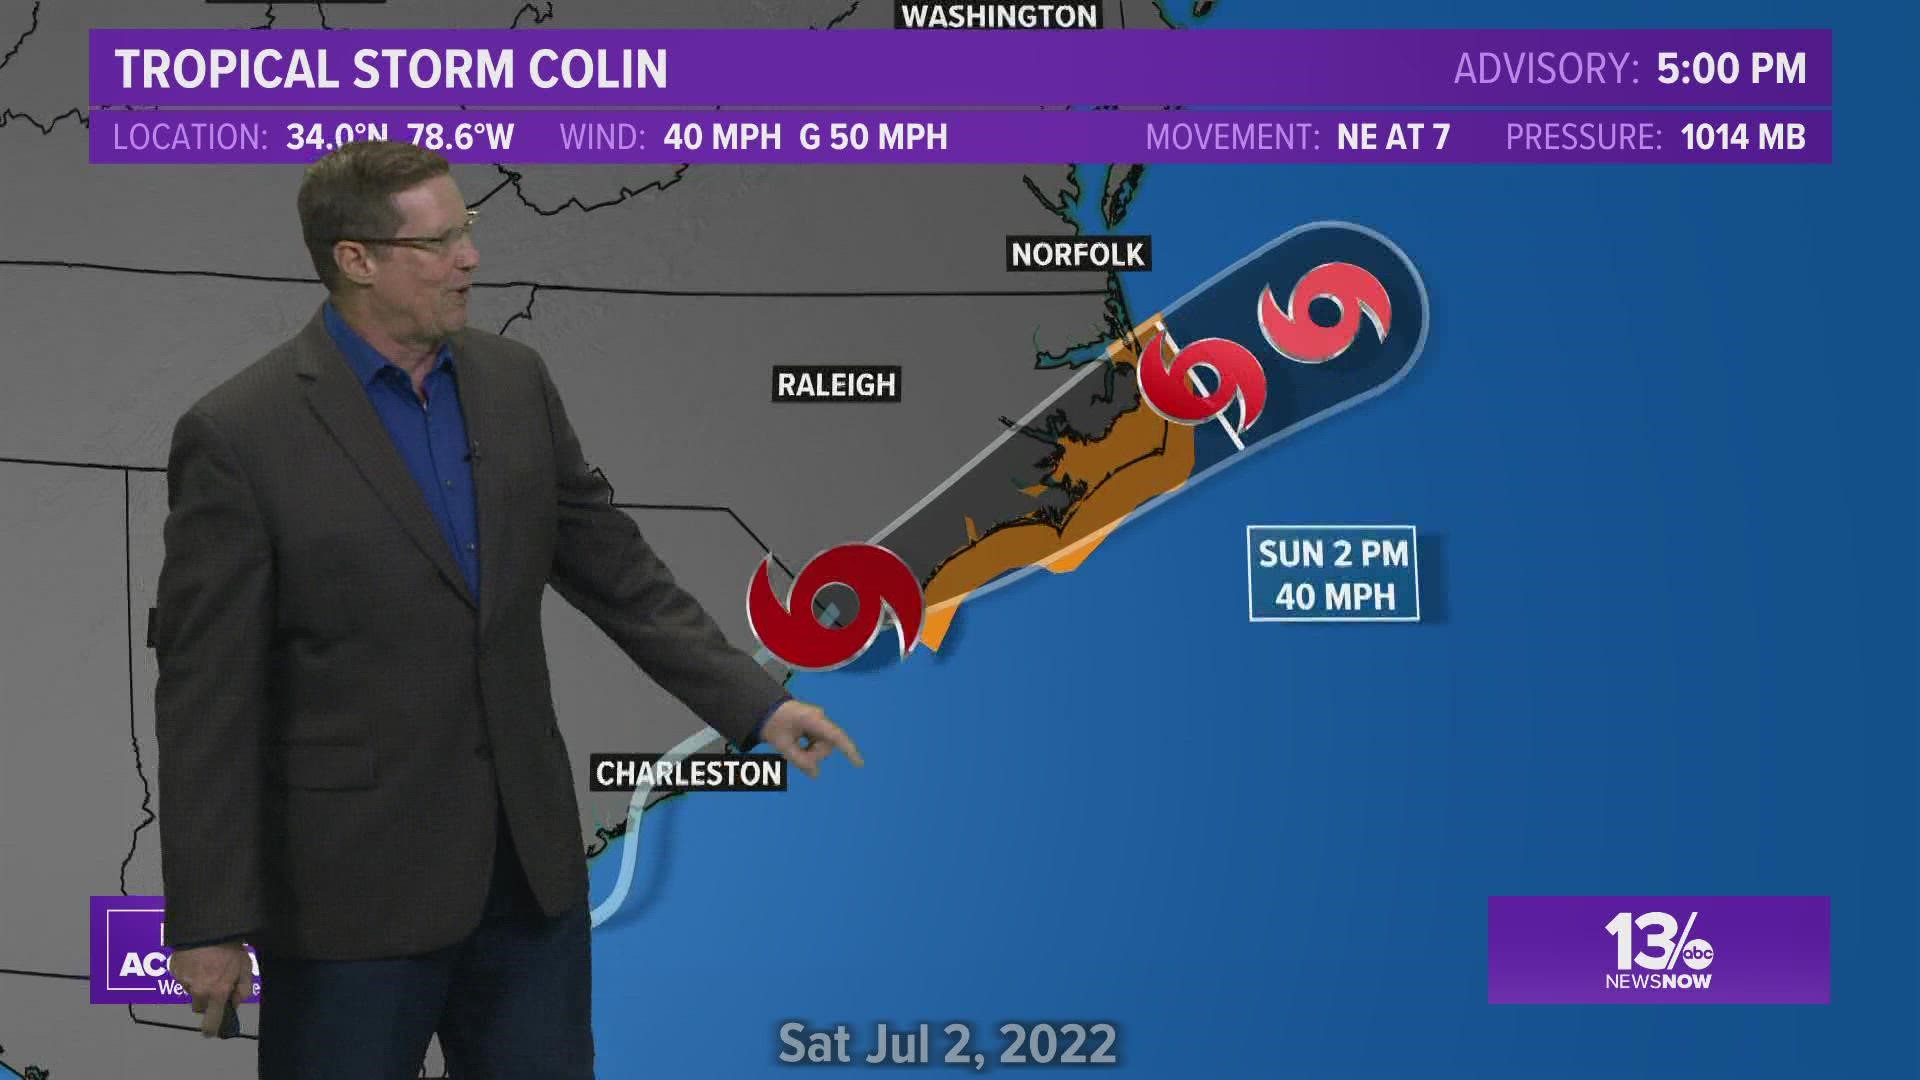 Tropical Storm Colin is bringing the threat of rain and high winds for a day or two during the holiday weekend to both North and South Carolina.